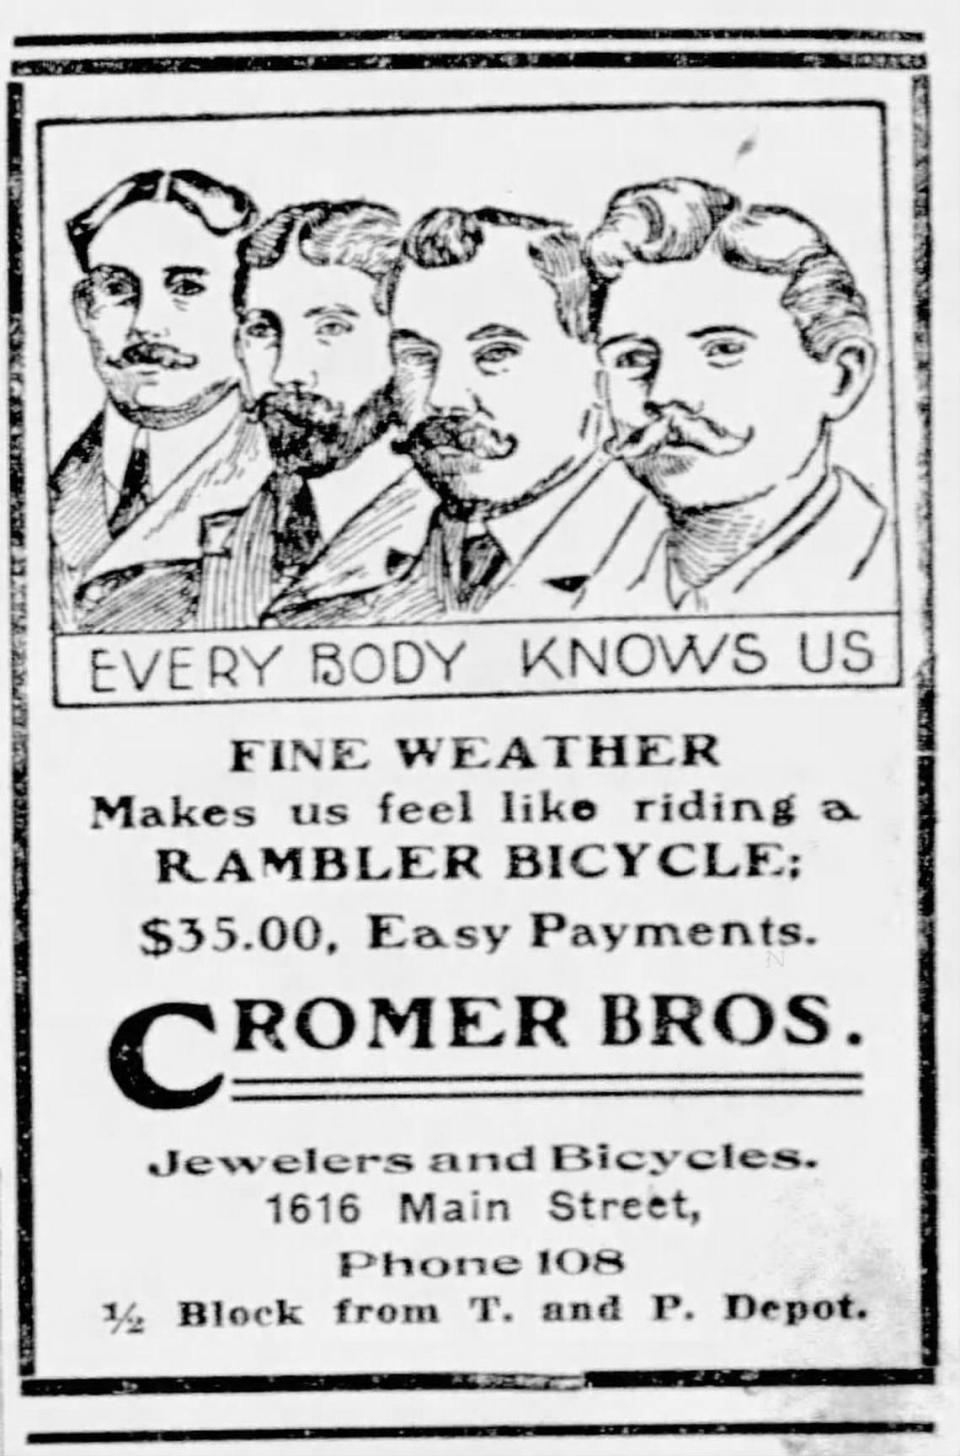 Henry R. Cromer built a successful business in bicycle sales and repair, with jewelry sales as an unusual sideline. His sons, depicted in this 1903 Star-Telegram ad, continued the bicycle and jewelry business after their father’s short-lived attempt to sell Rambler cars failed. Fort Worth Star-Telegram